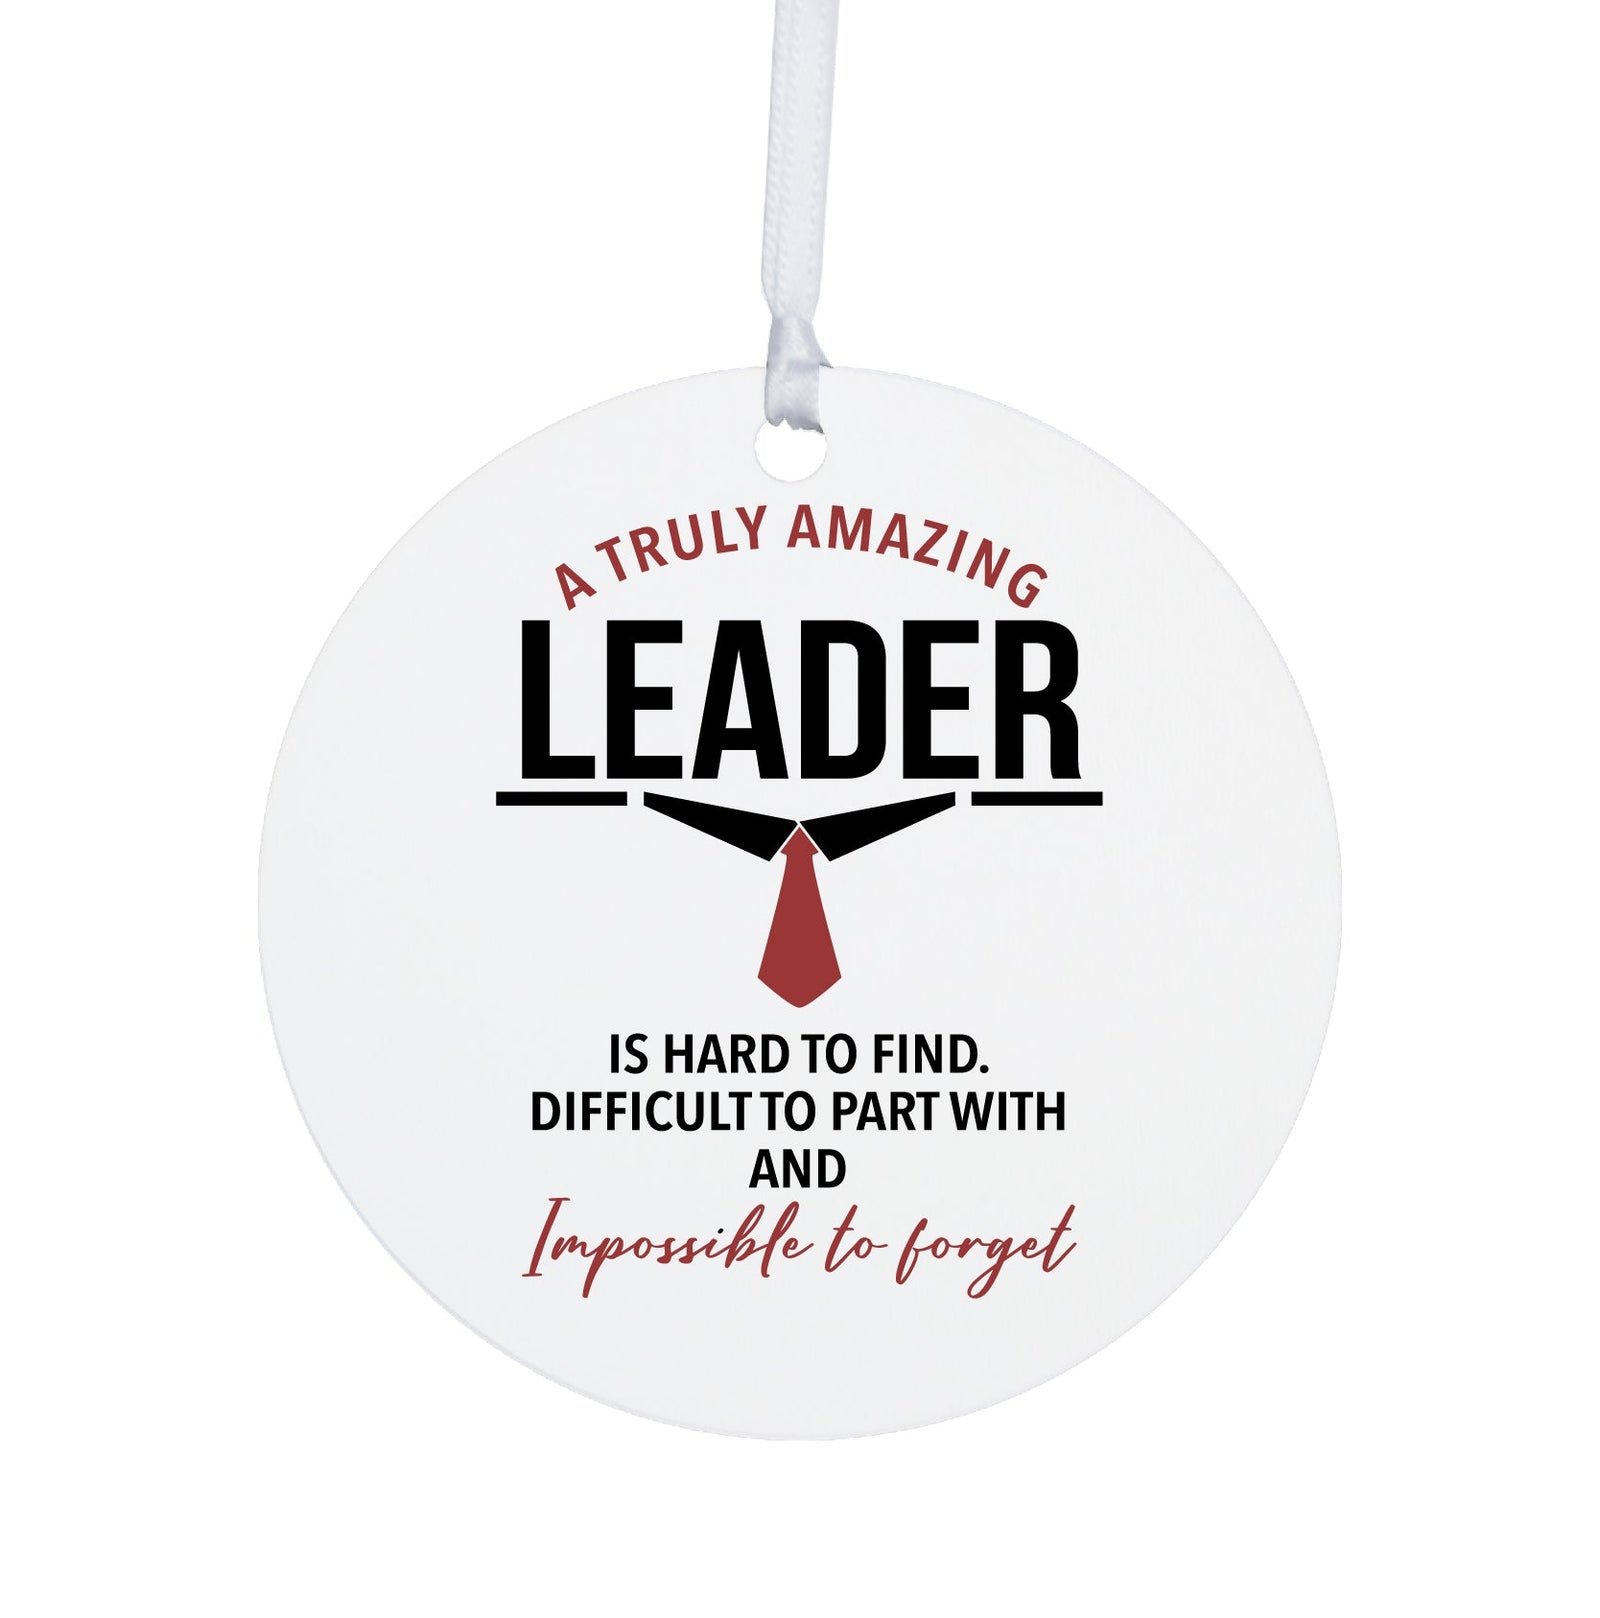 Boss / Leader White Ornament With Inspirational Message Gift Ideas - A Truly Amazing Leader - LifeSong Milestones